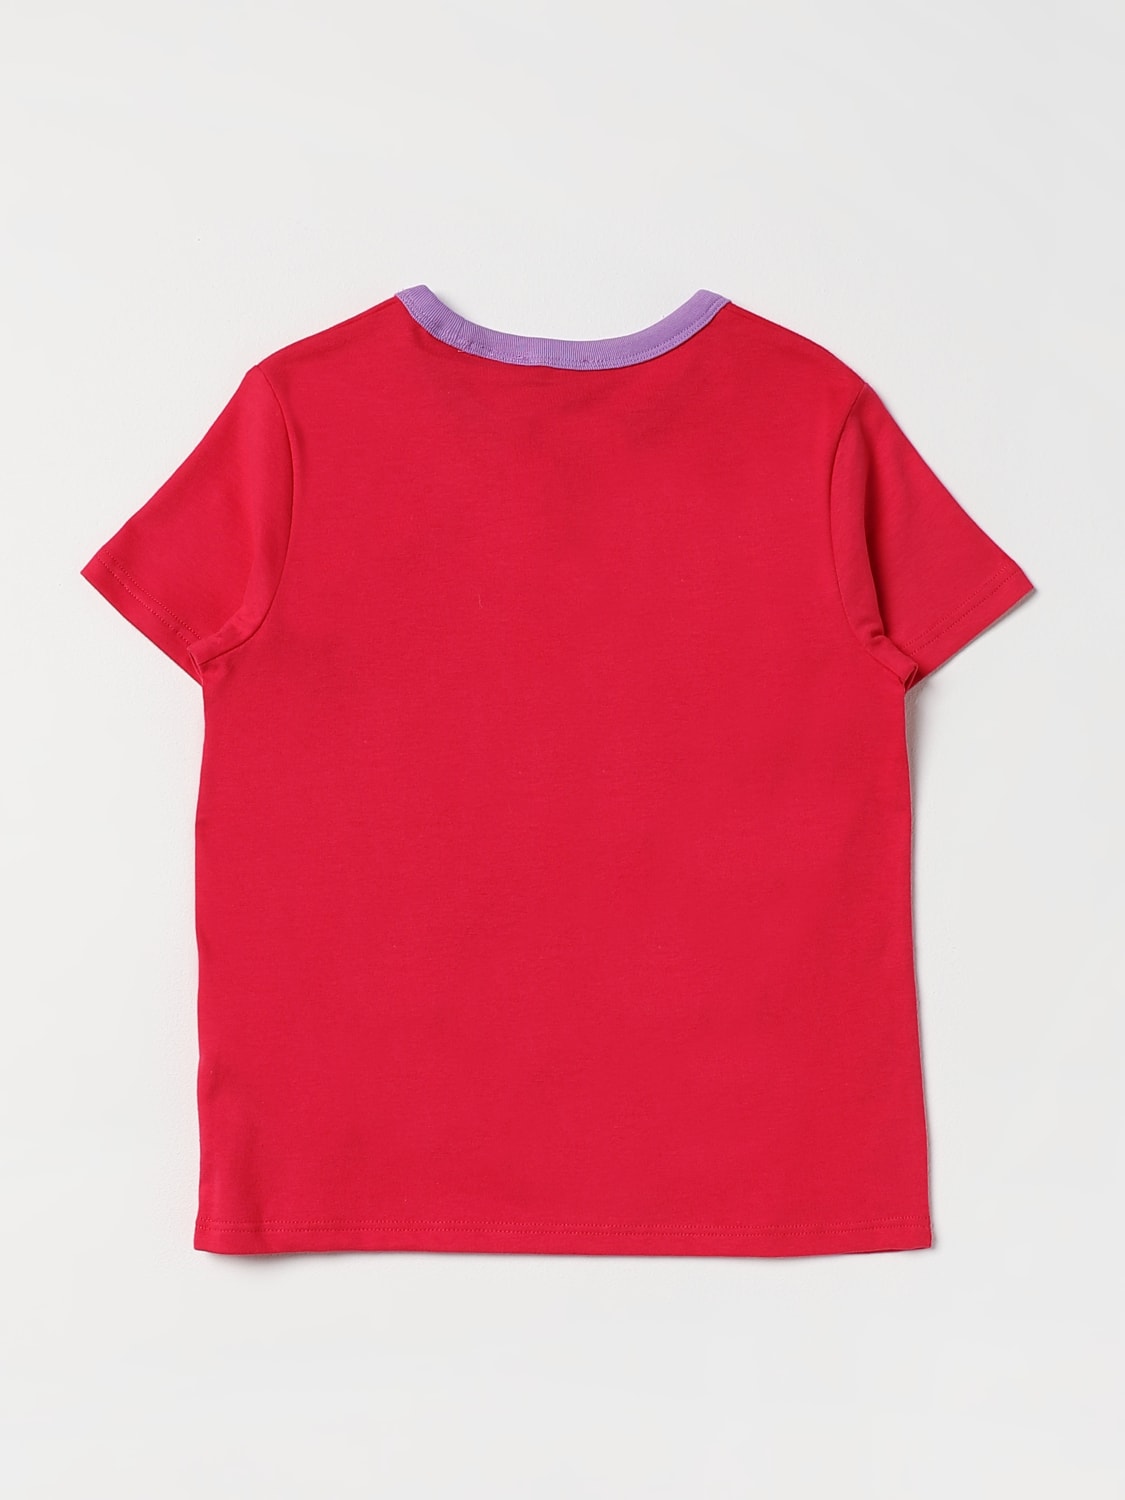 plain red t shirt front and back for girls